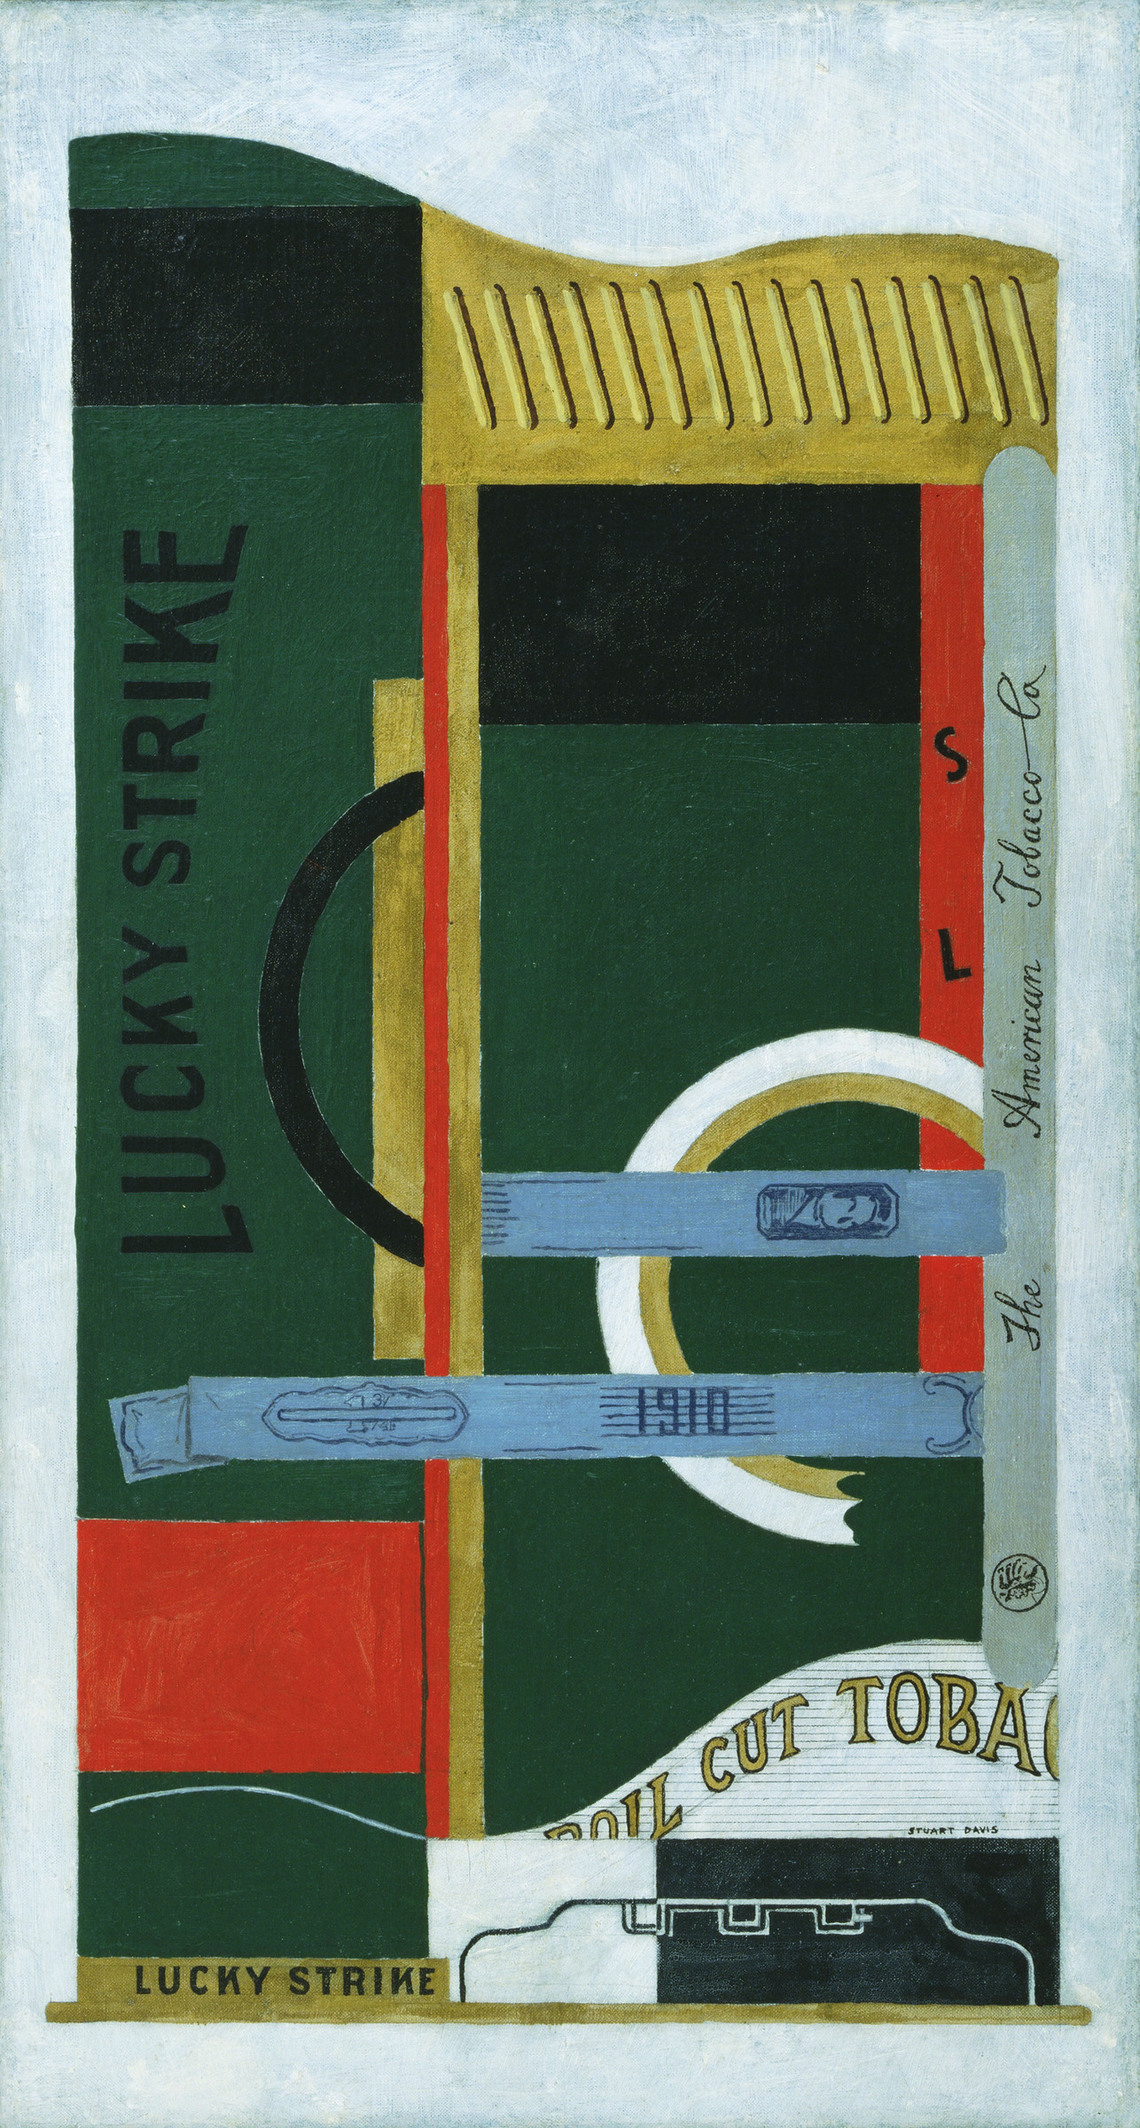 Lucky Strike (1921) by Stuart Davis. Oil on canvas, 33 1/4 × 18 in. (84.5 × 45.7 cm). The Museum of Modern Art, New York; gift of the American Tobacco Company, Inc., 1951. © Estate of Stuart Davis. Image courtesy of The Whitney